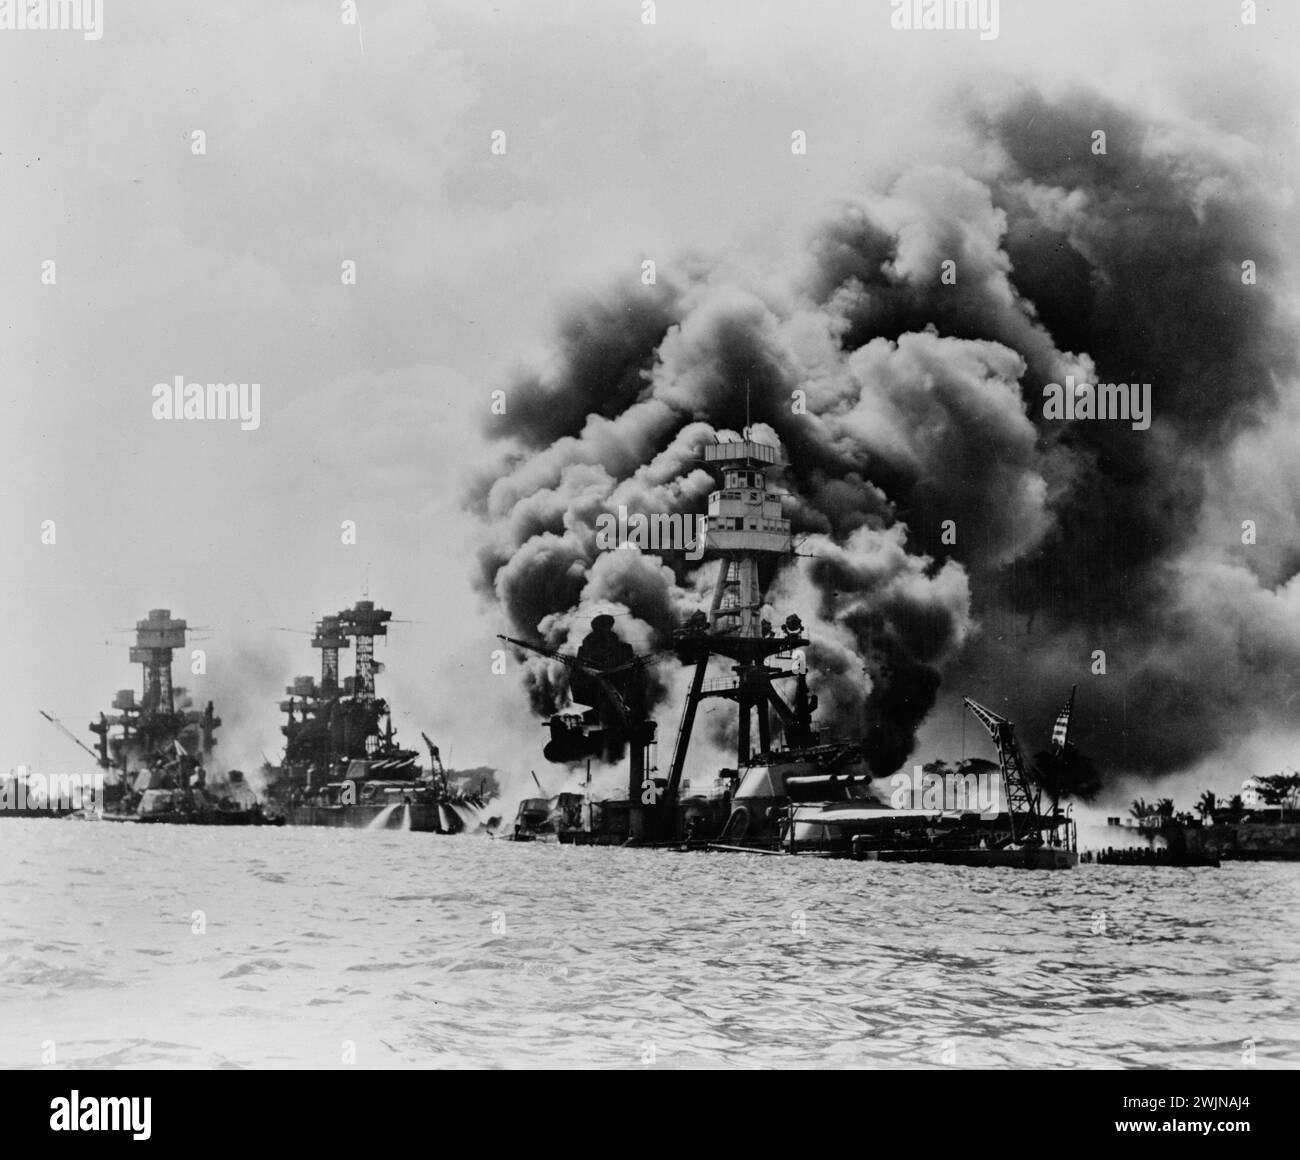 Hawaii, Pearl Harbor attack, Dec 7, 1941 - Left to right U.S.S. West Virginia, severely damaged; U.S.S. Tennessee, damaged; and U.S.S. Arizona, sunk Stock Photo